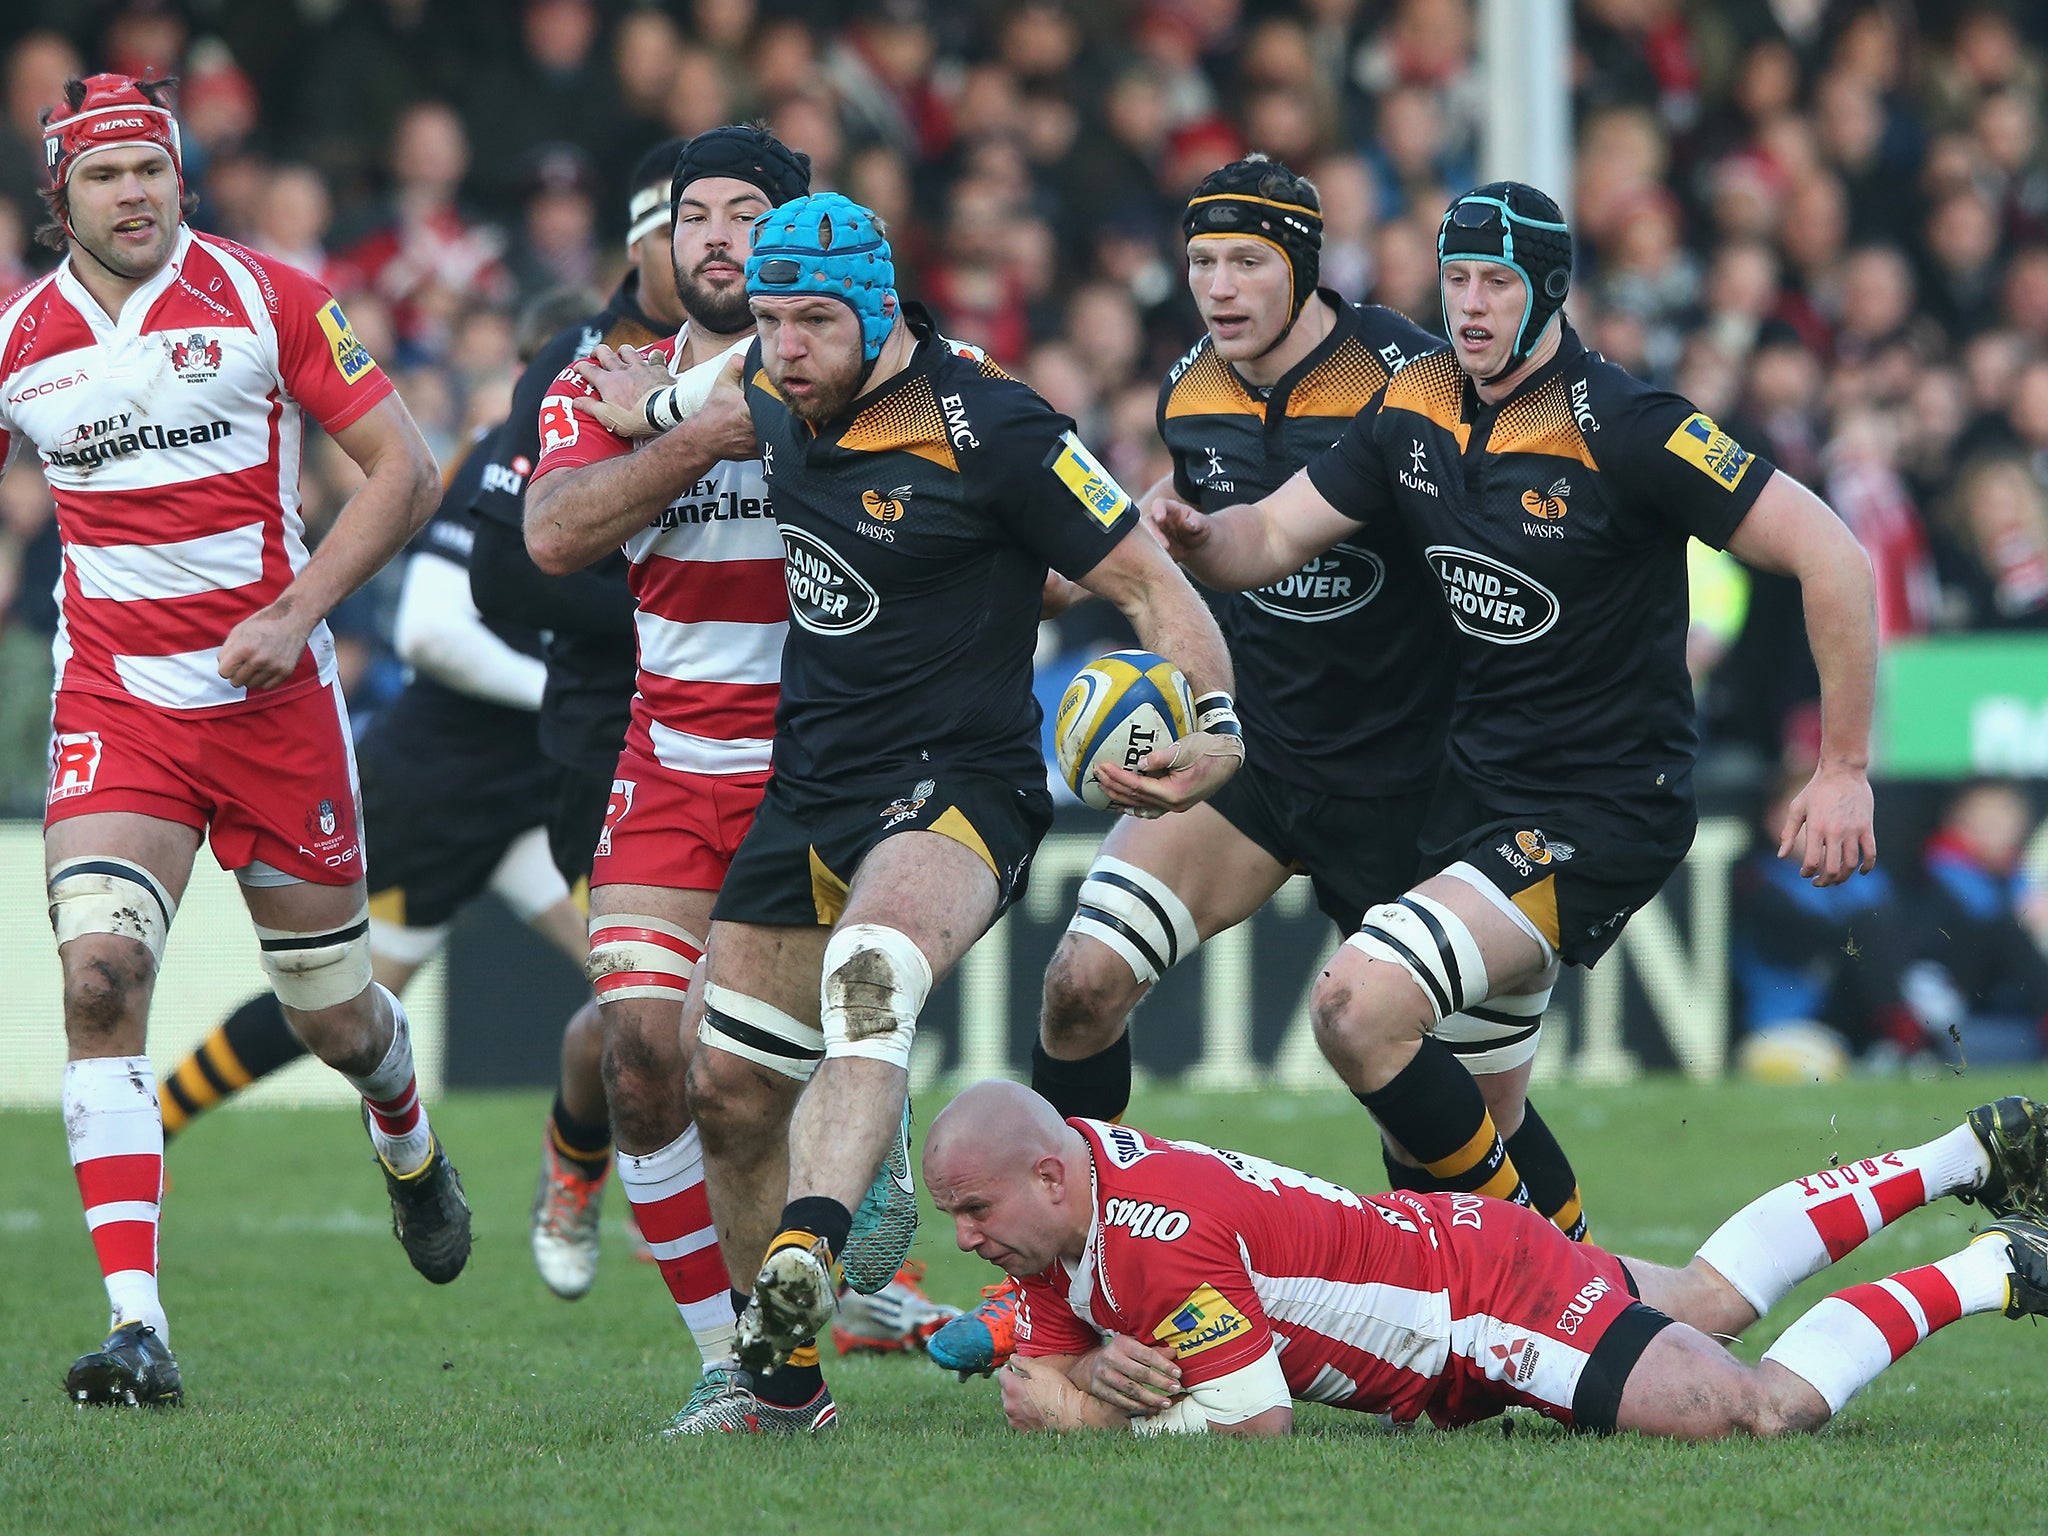 James Haskell of Wasps charges upfield during the Aviva Premiership match between Gloucester and Wasps at Kingsholm Stadium